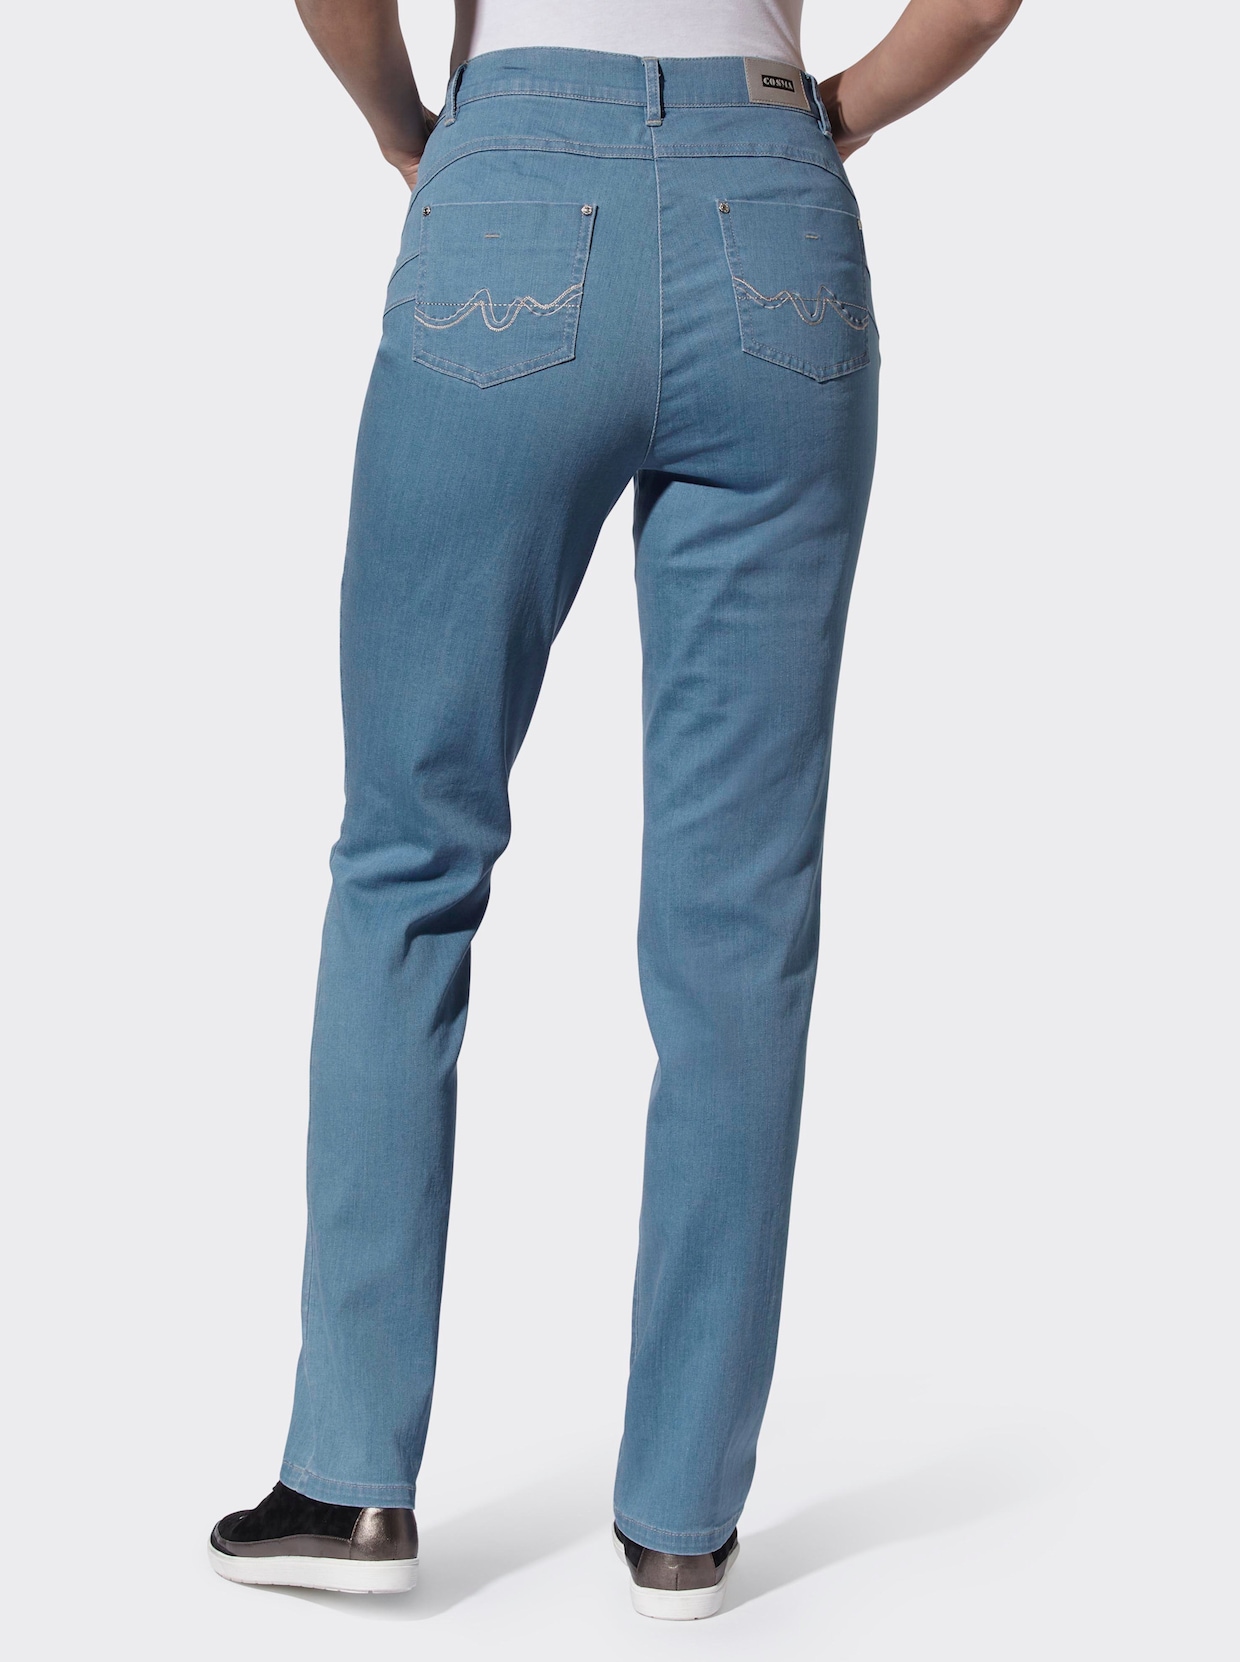 Cosma Jeans - blue-bleached